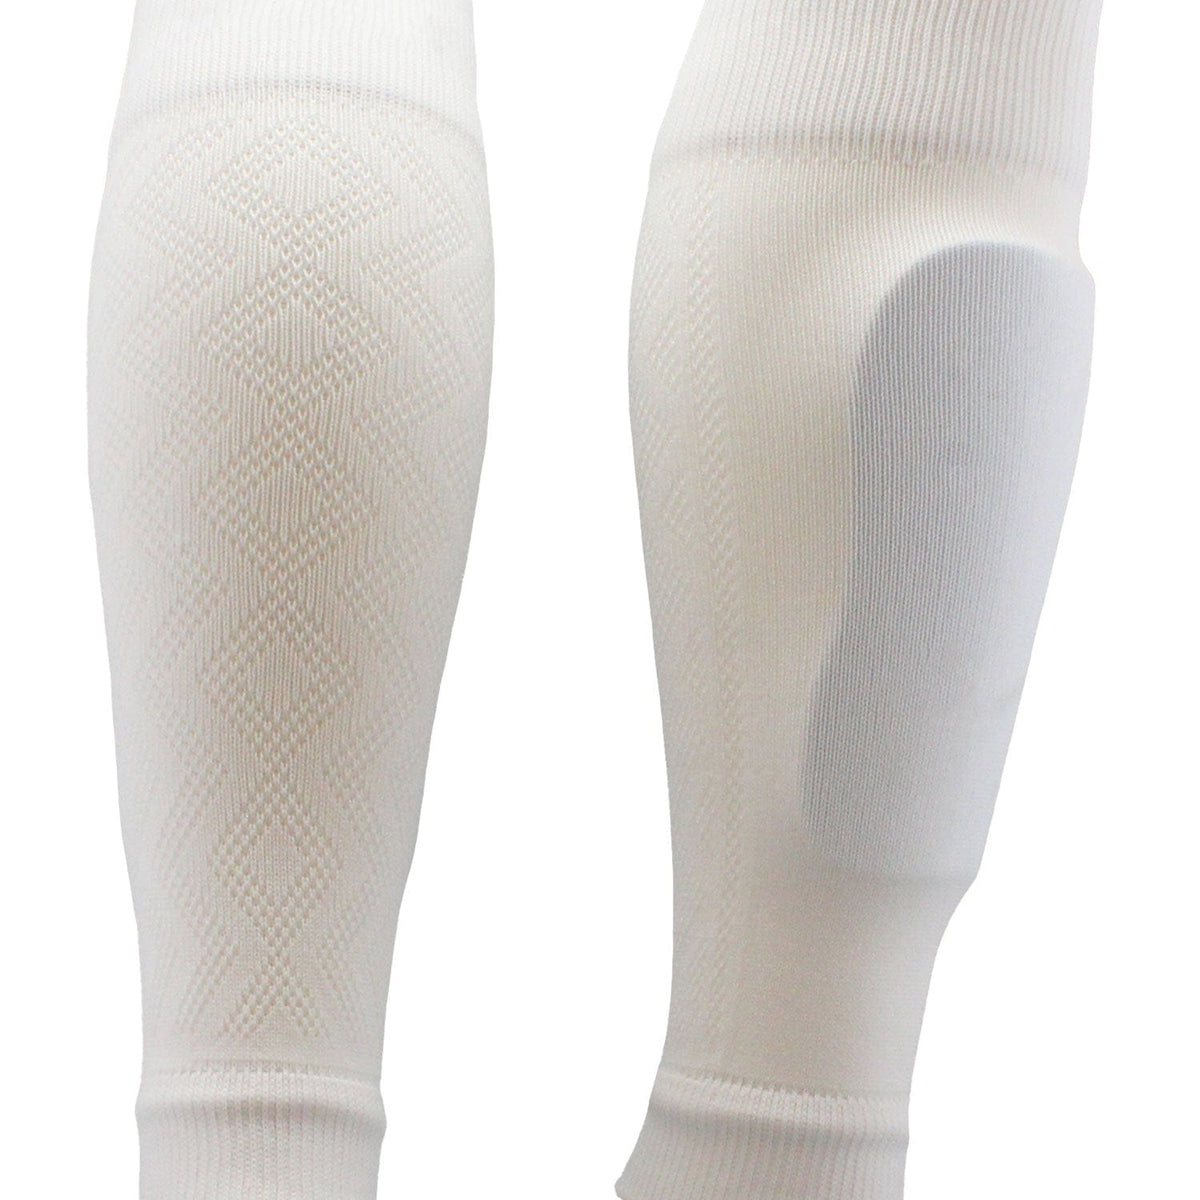 Wholesale Soccer Grip Socks In A Range Of Cuts And Colors For Every Shoe 